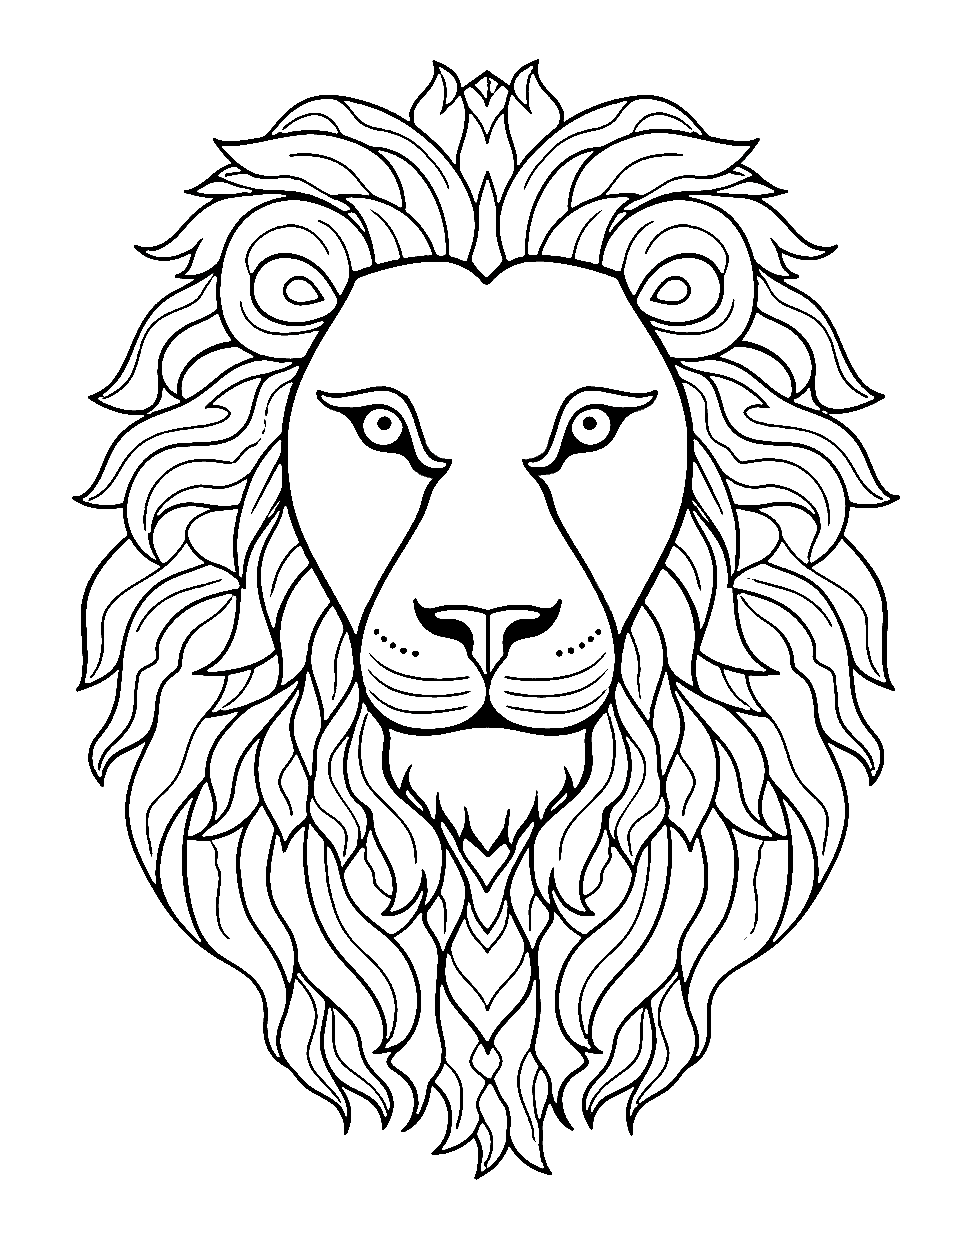 Lion coloring pages free printable sheets